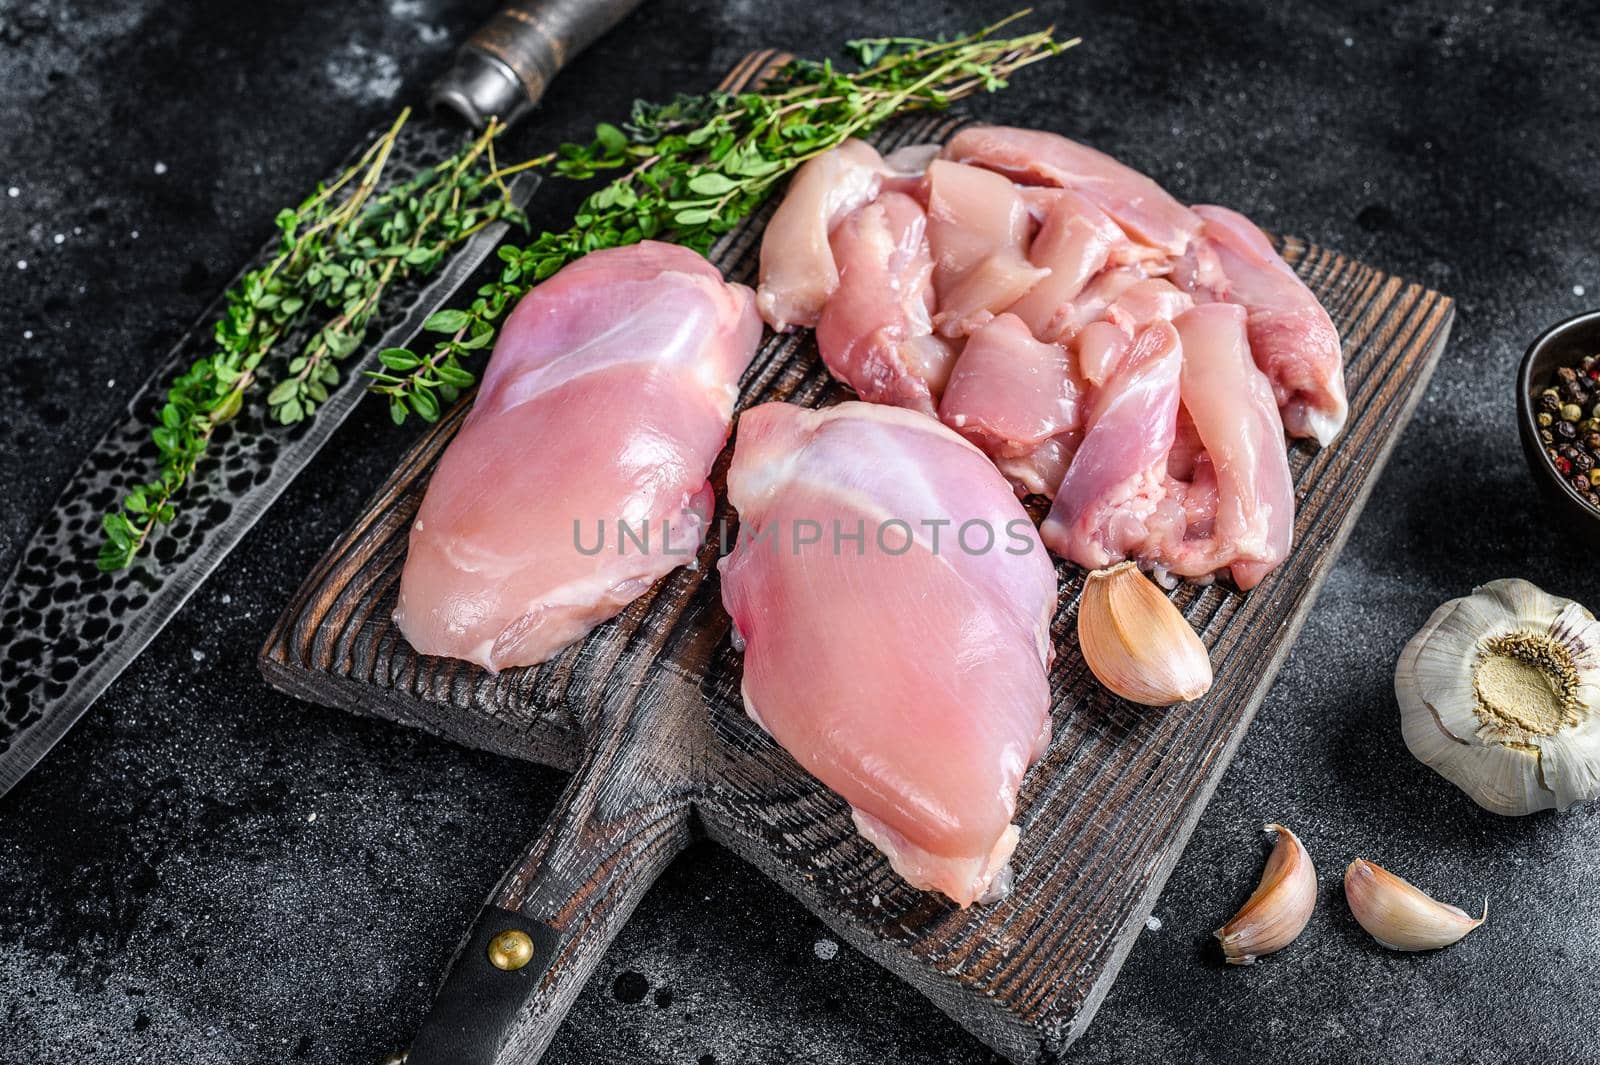 Sliced Raw Chicken thigh fillet on a wooden cutting board. Black background. Top view by Composter